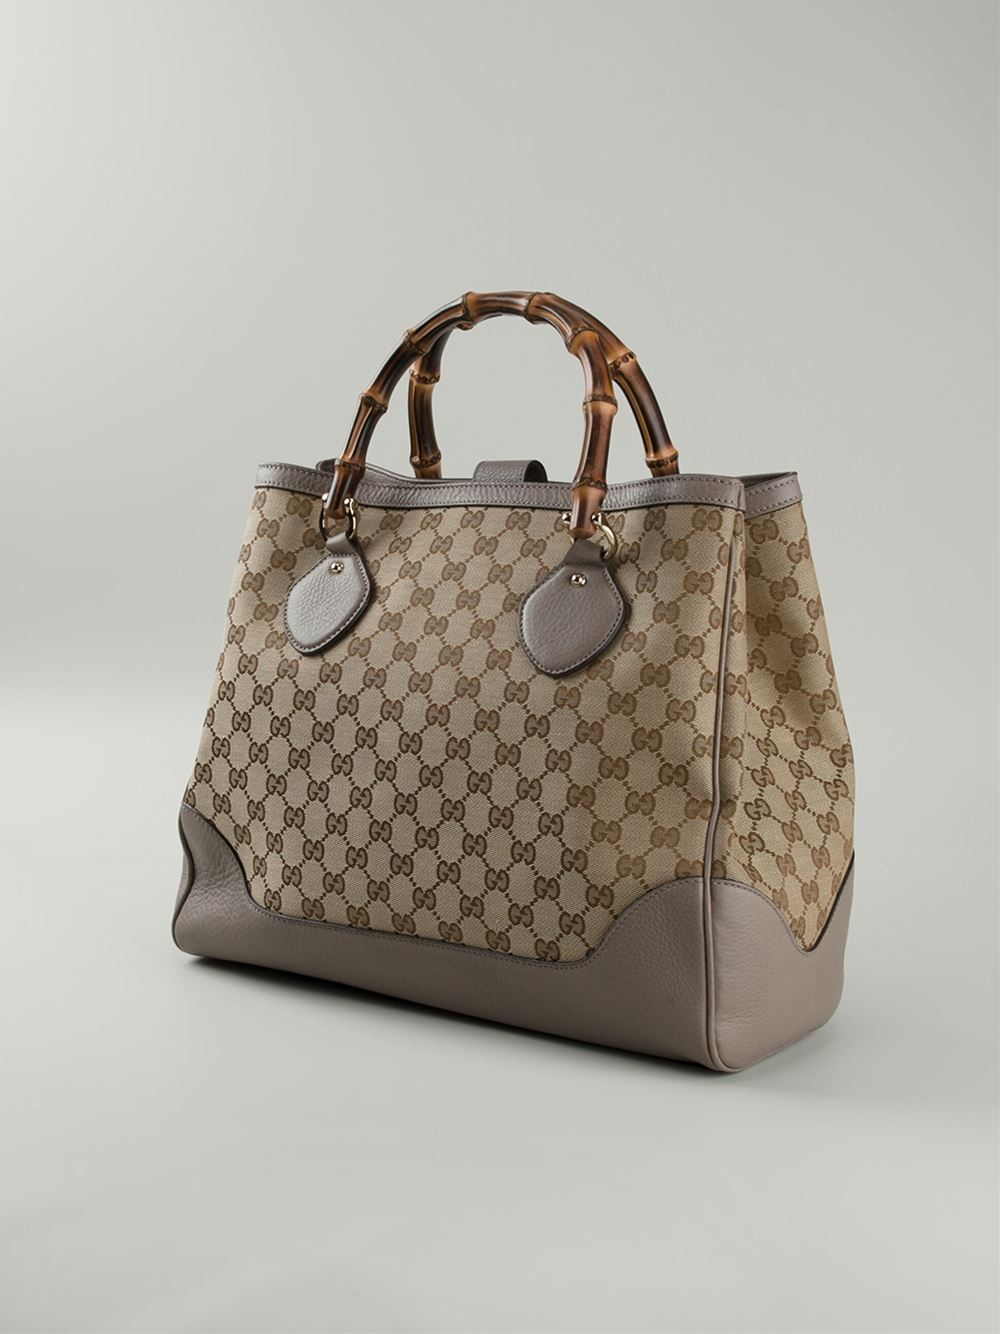 Gucci Signature Monogram Wooden Handle Tote in Natural - Lyst